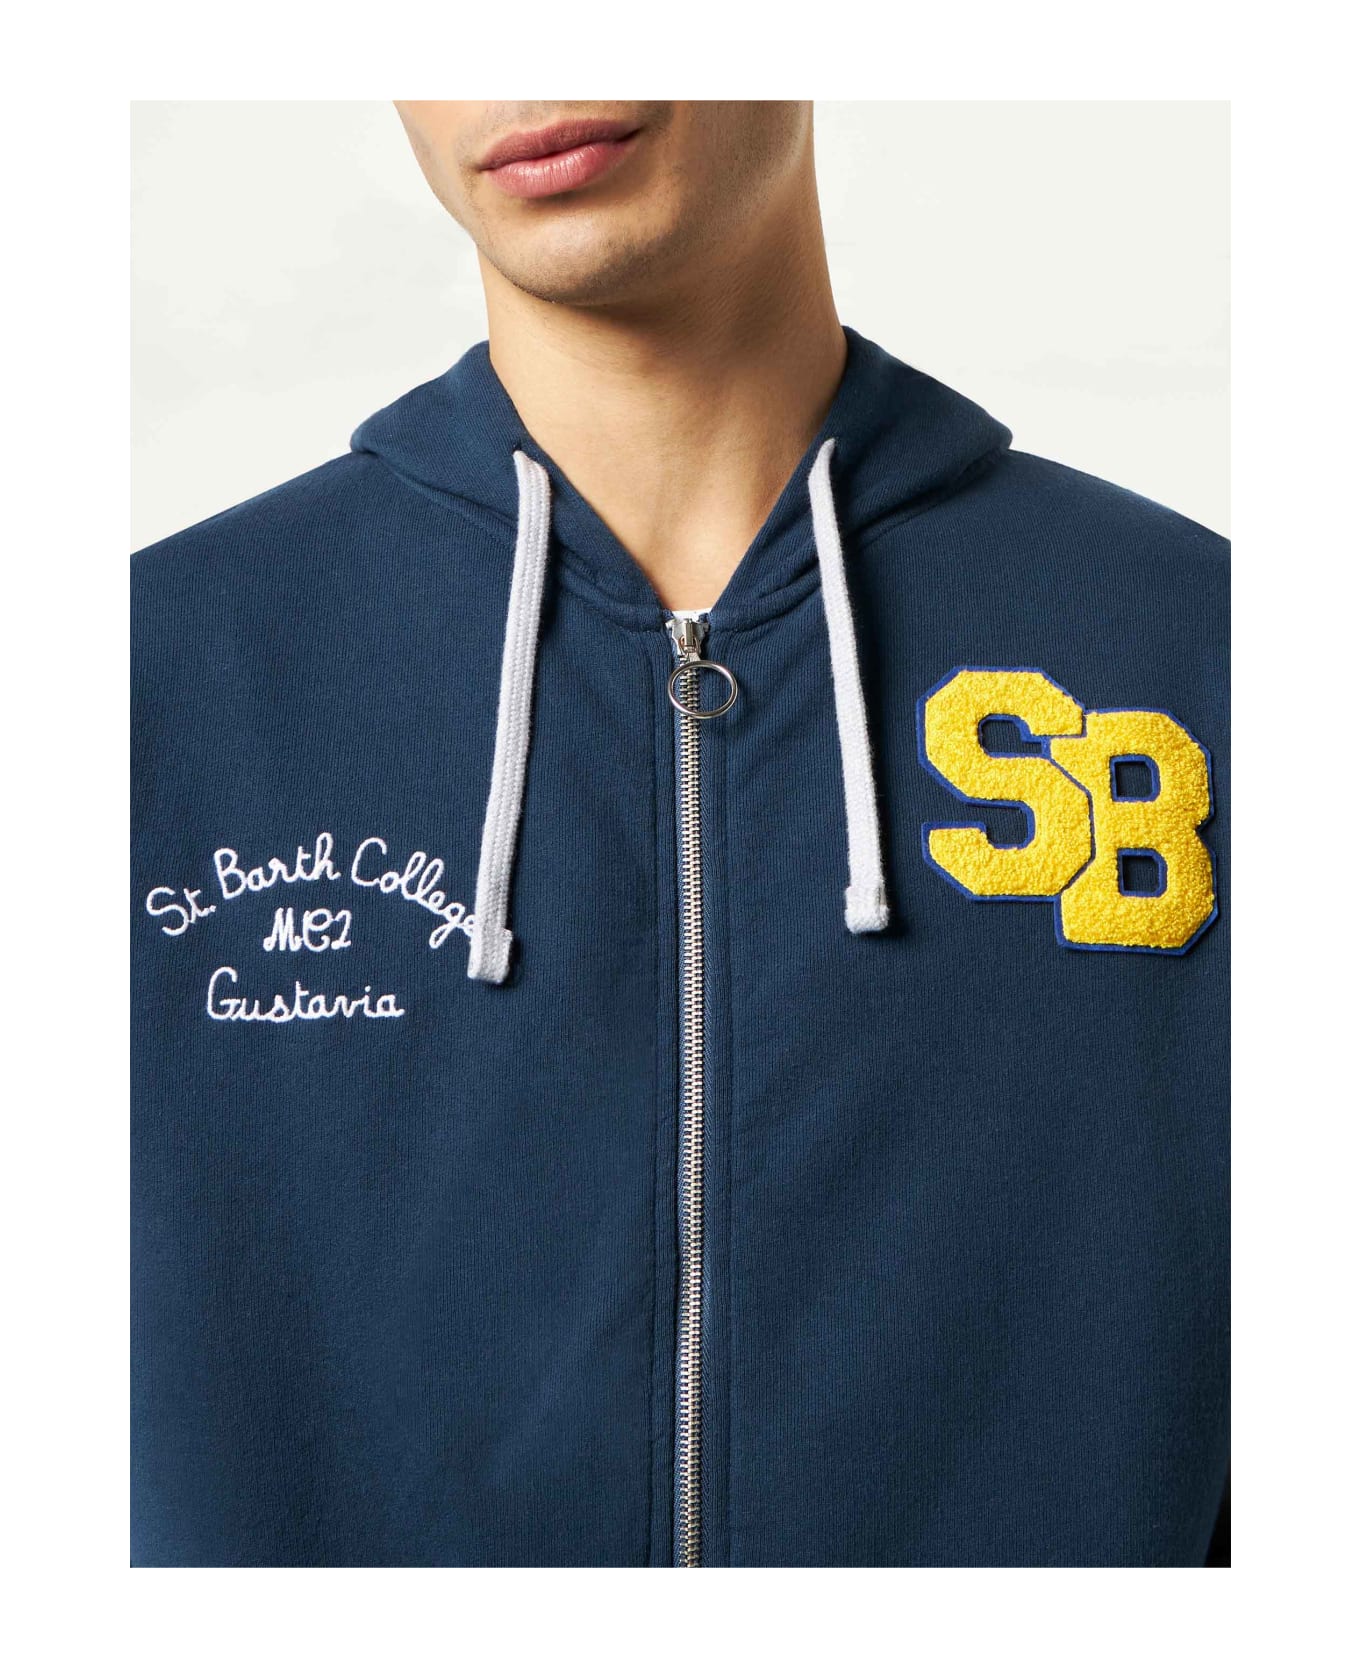 MC2 Saint Barth Man Cotton Sweatshirt With Patch And Embroidery